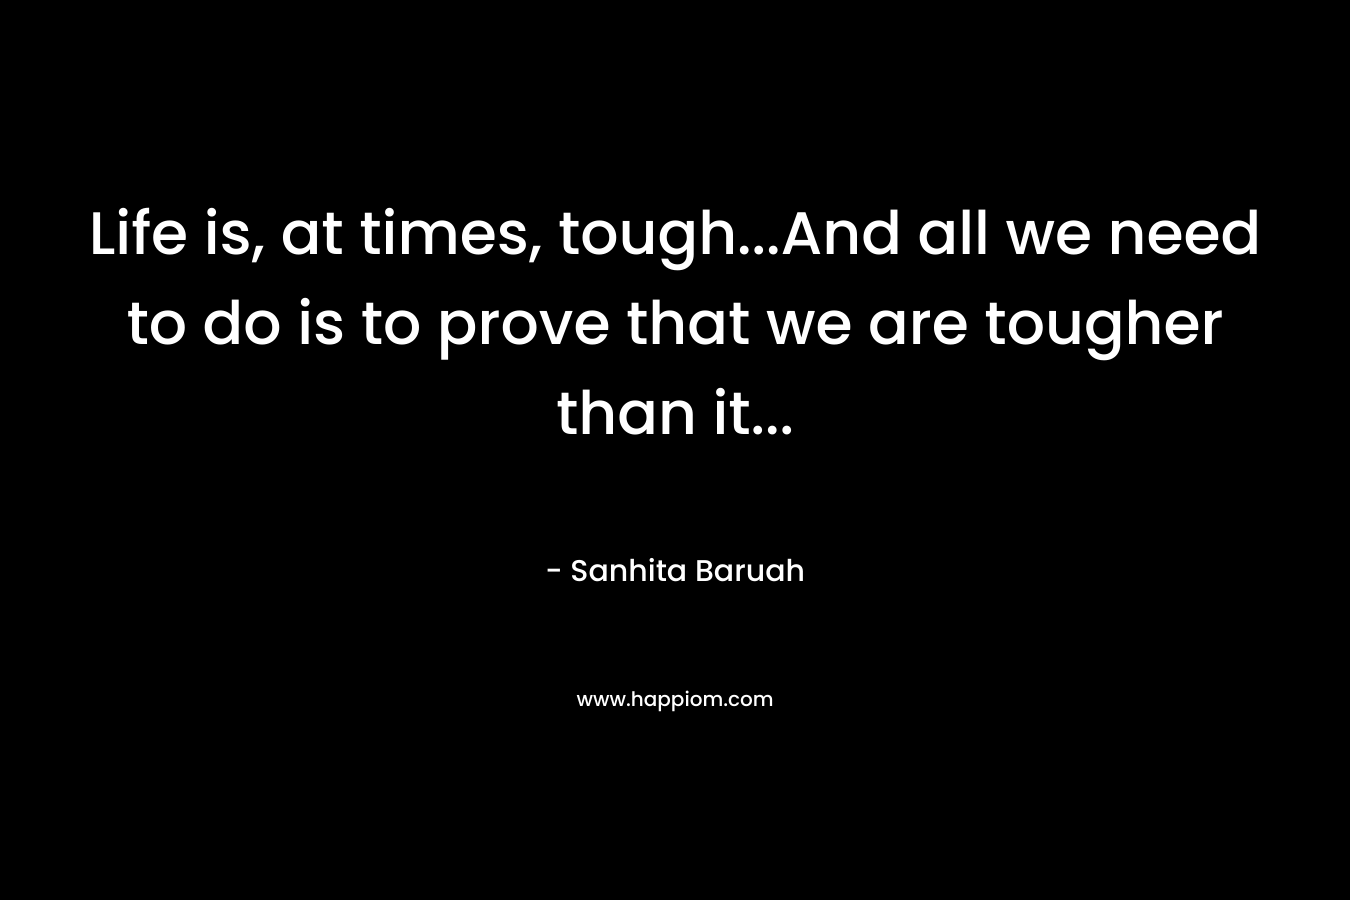 Life is, at times, tough…And all we need to do is to prove that we are tougher than it… – Sanhita Baruah